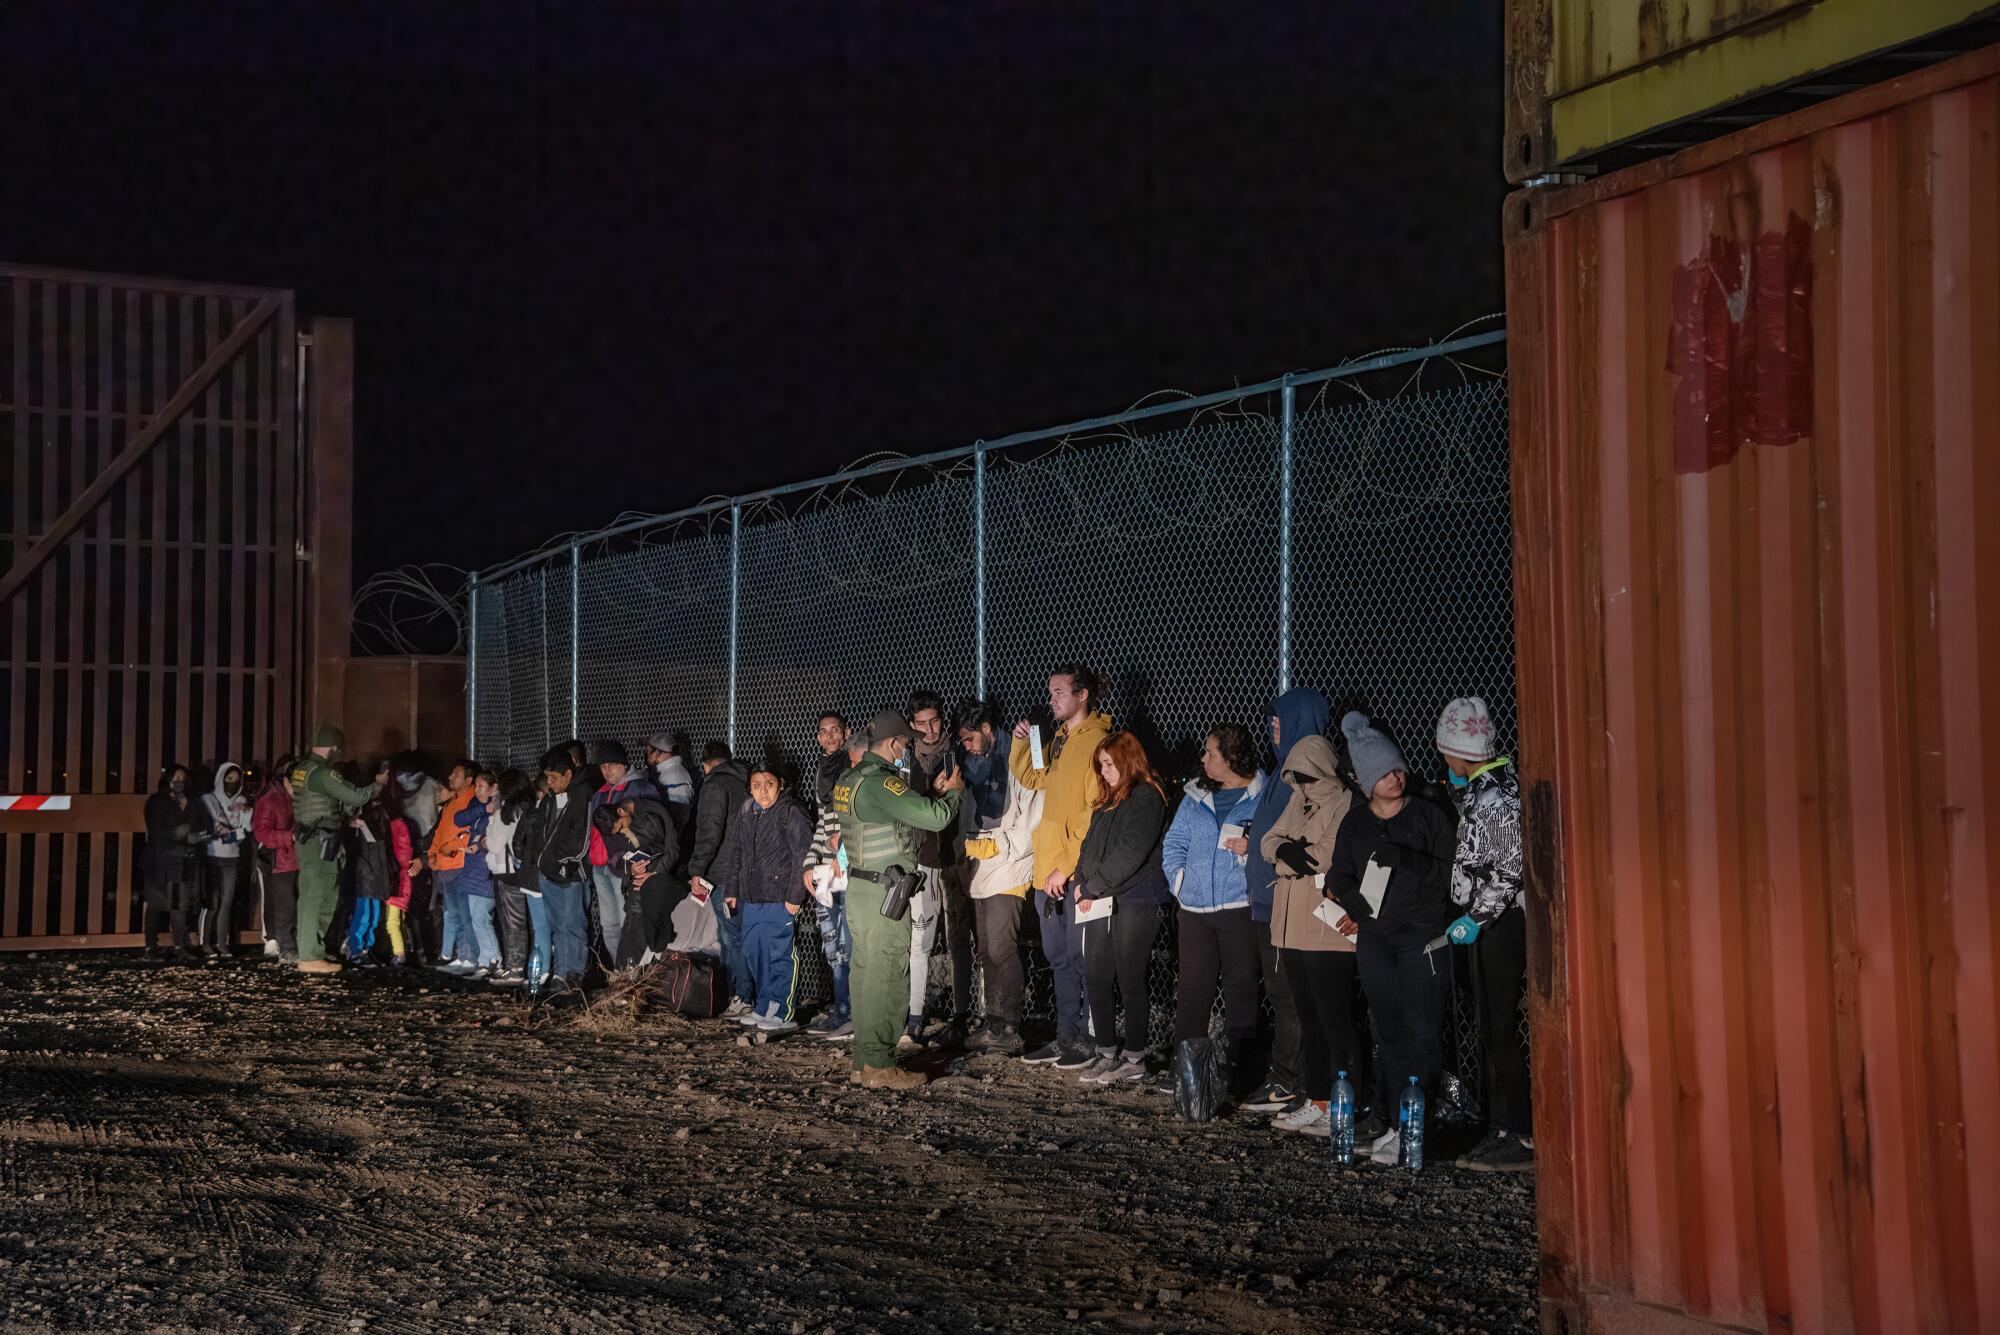 Two U.S. Border Patrol agents photograph part of about 100 people who surrendered after crossing the Mexico/Arizona border